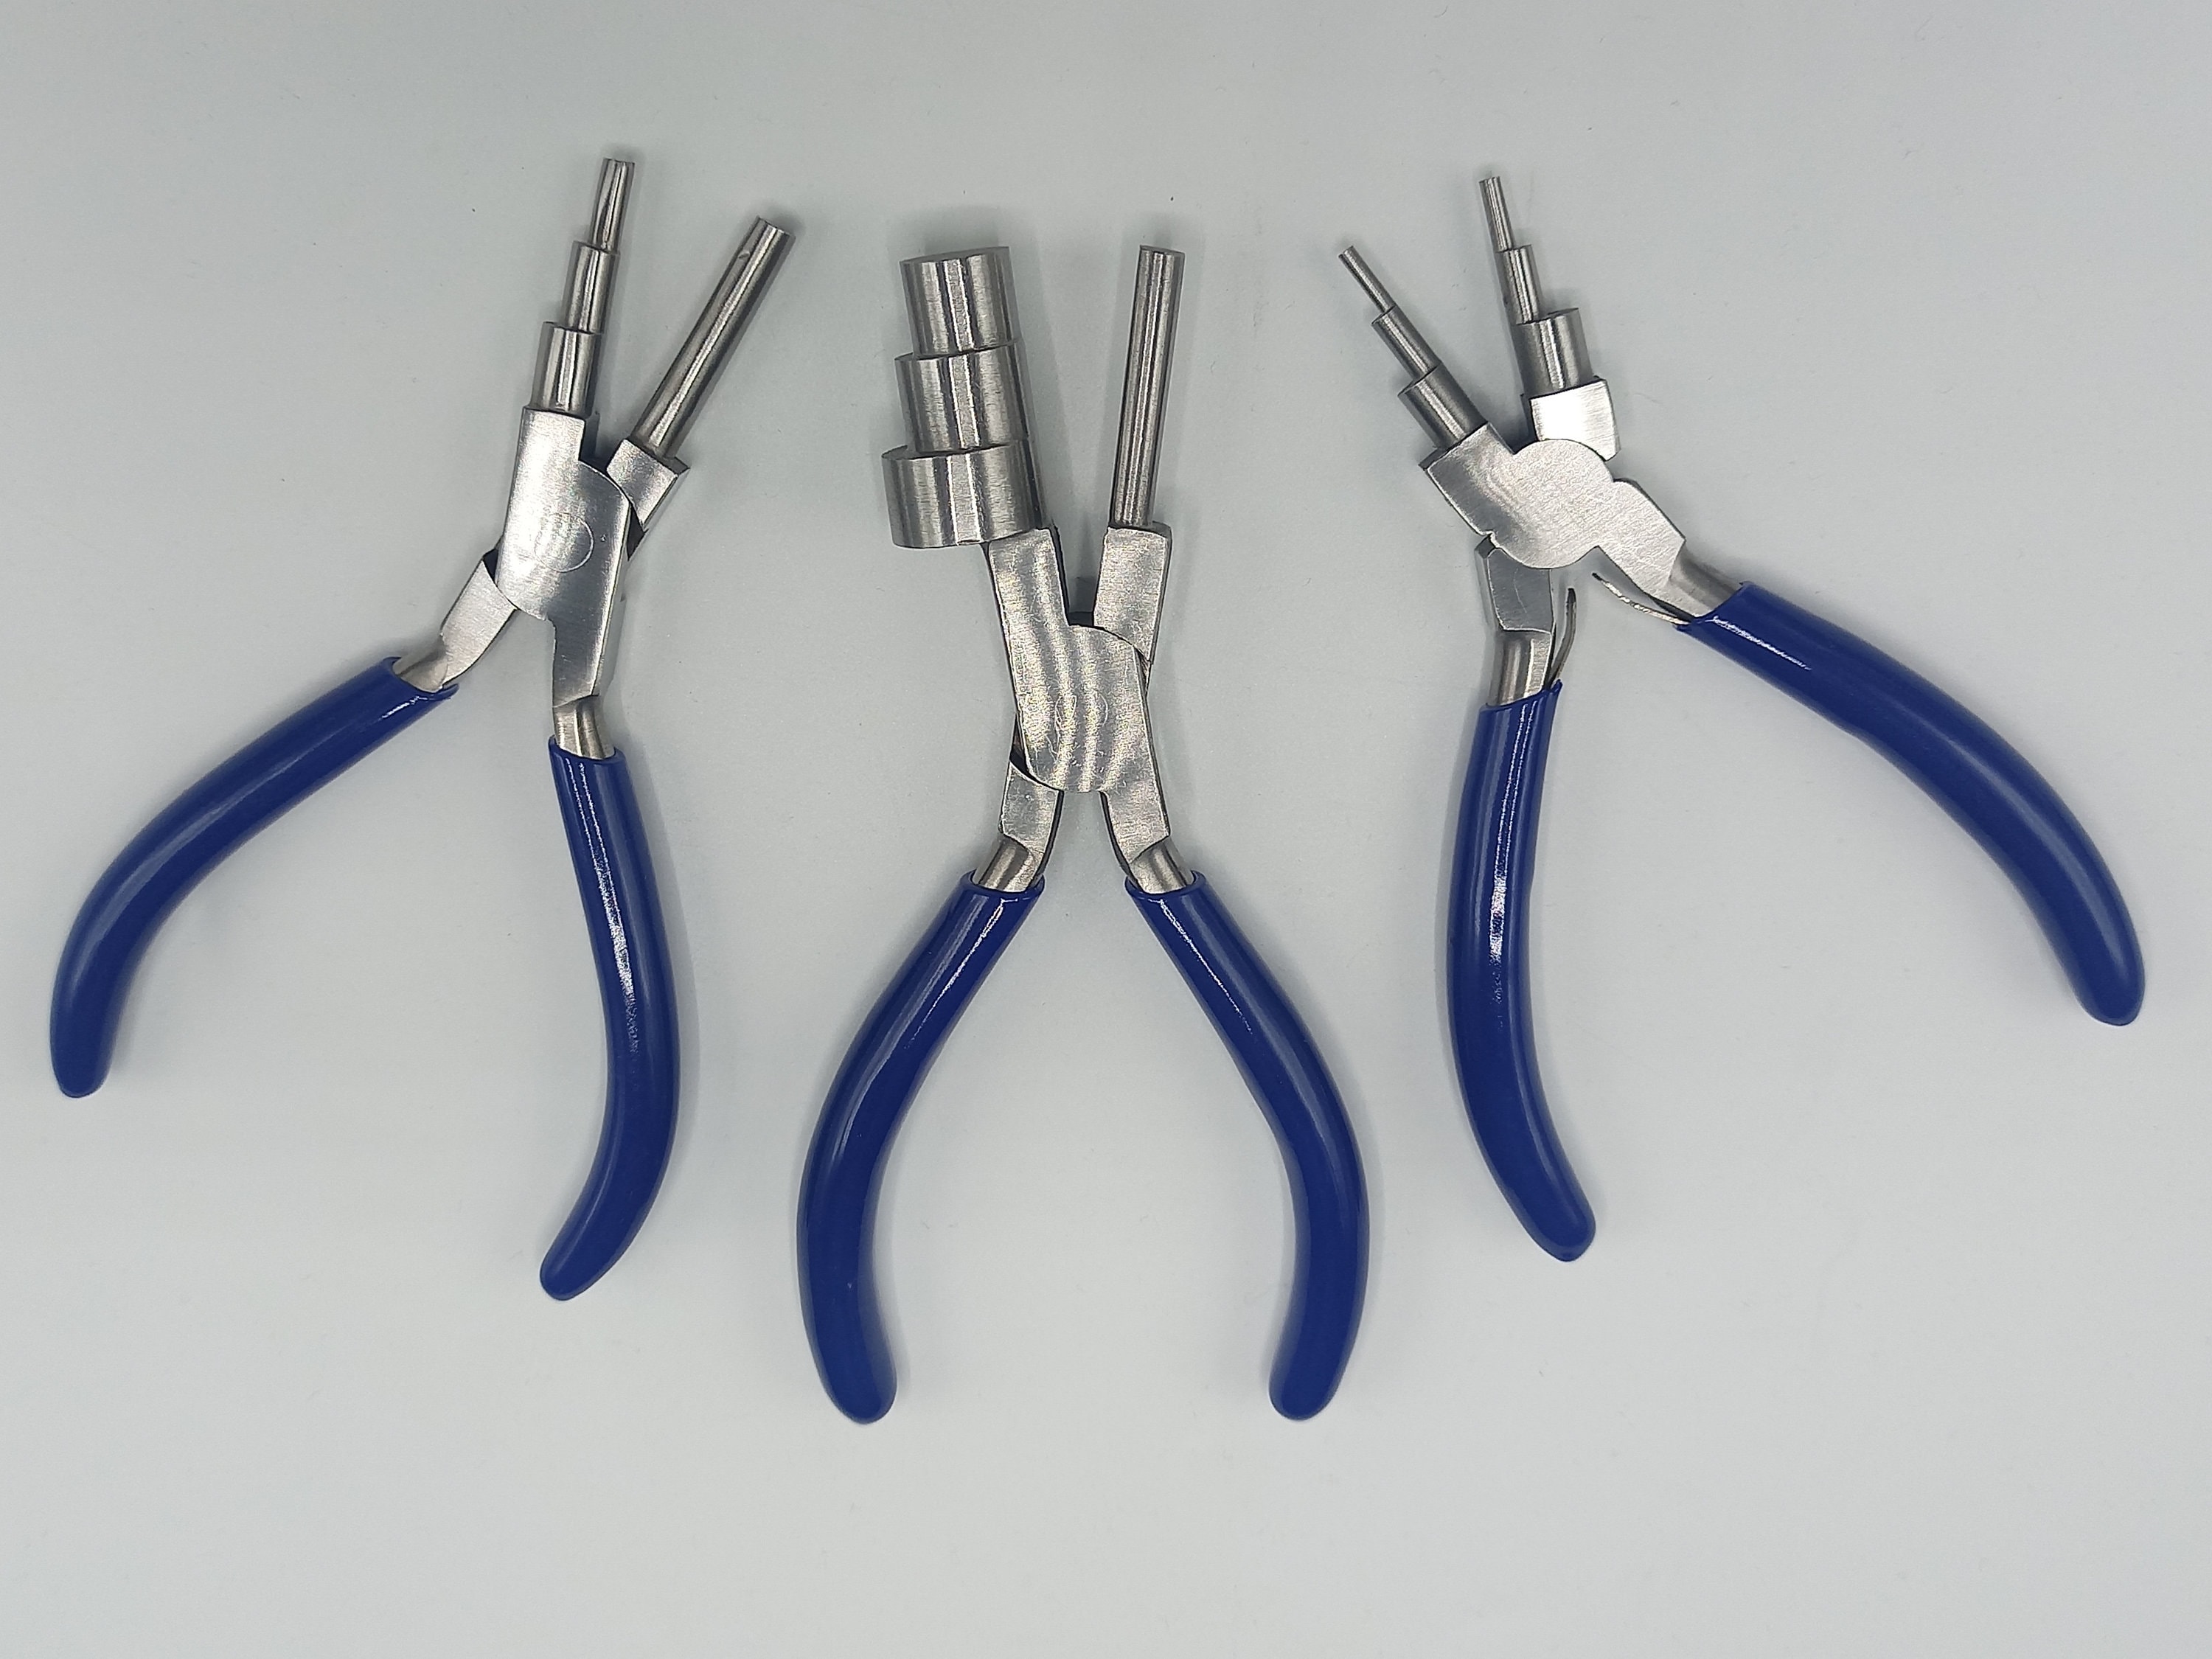 Jewelry Pliers Set, Jewelry Making Tools, Stainless Steel Pliers